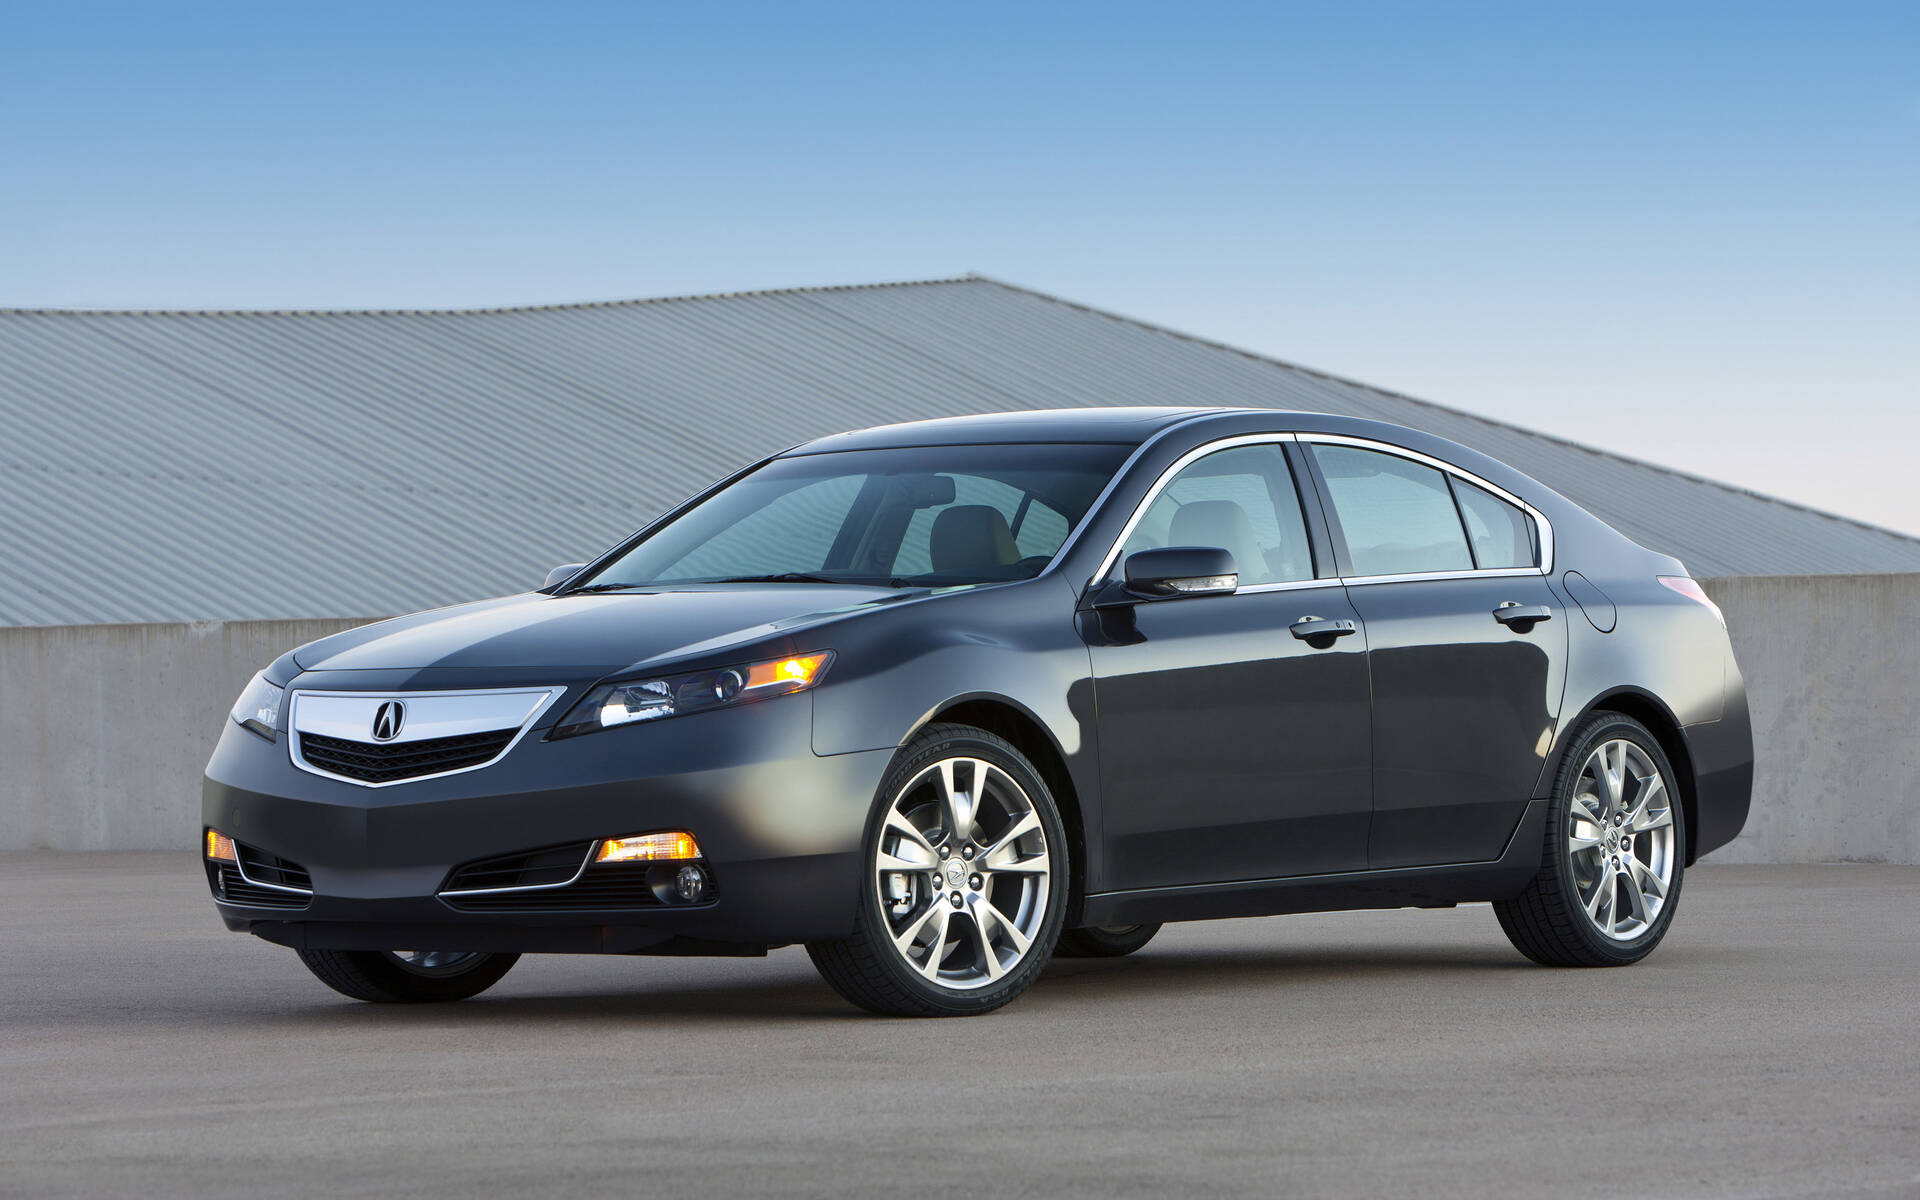 Acura TL, TLX, TSX: What's the Difference? | Otogo